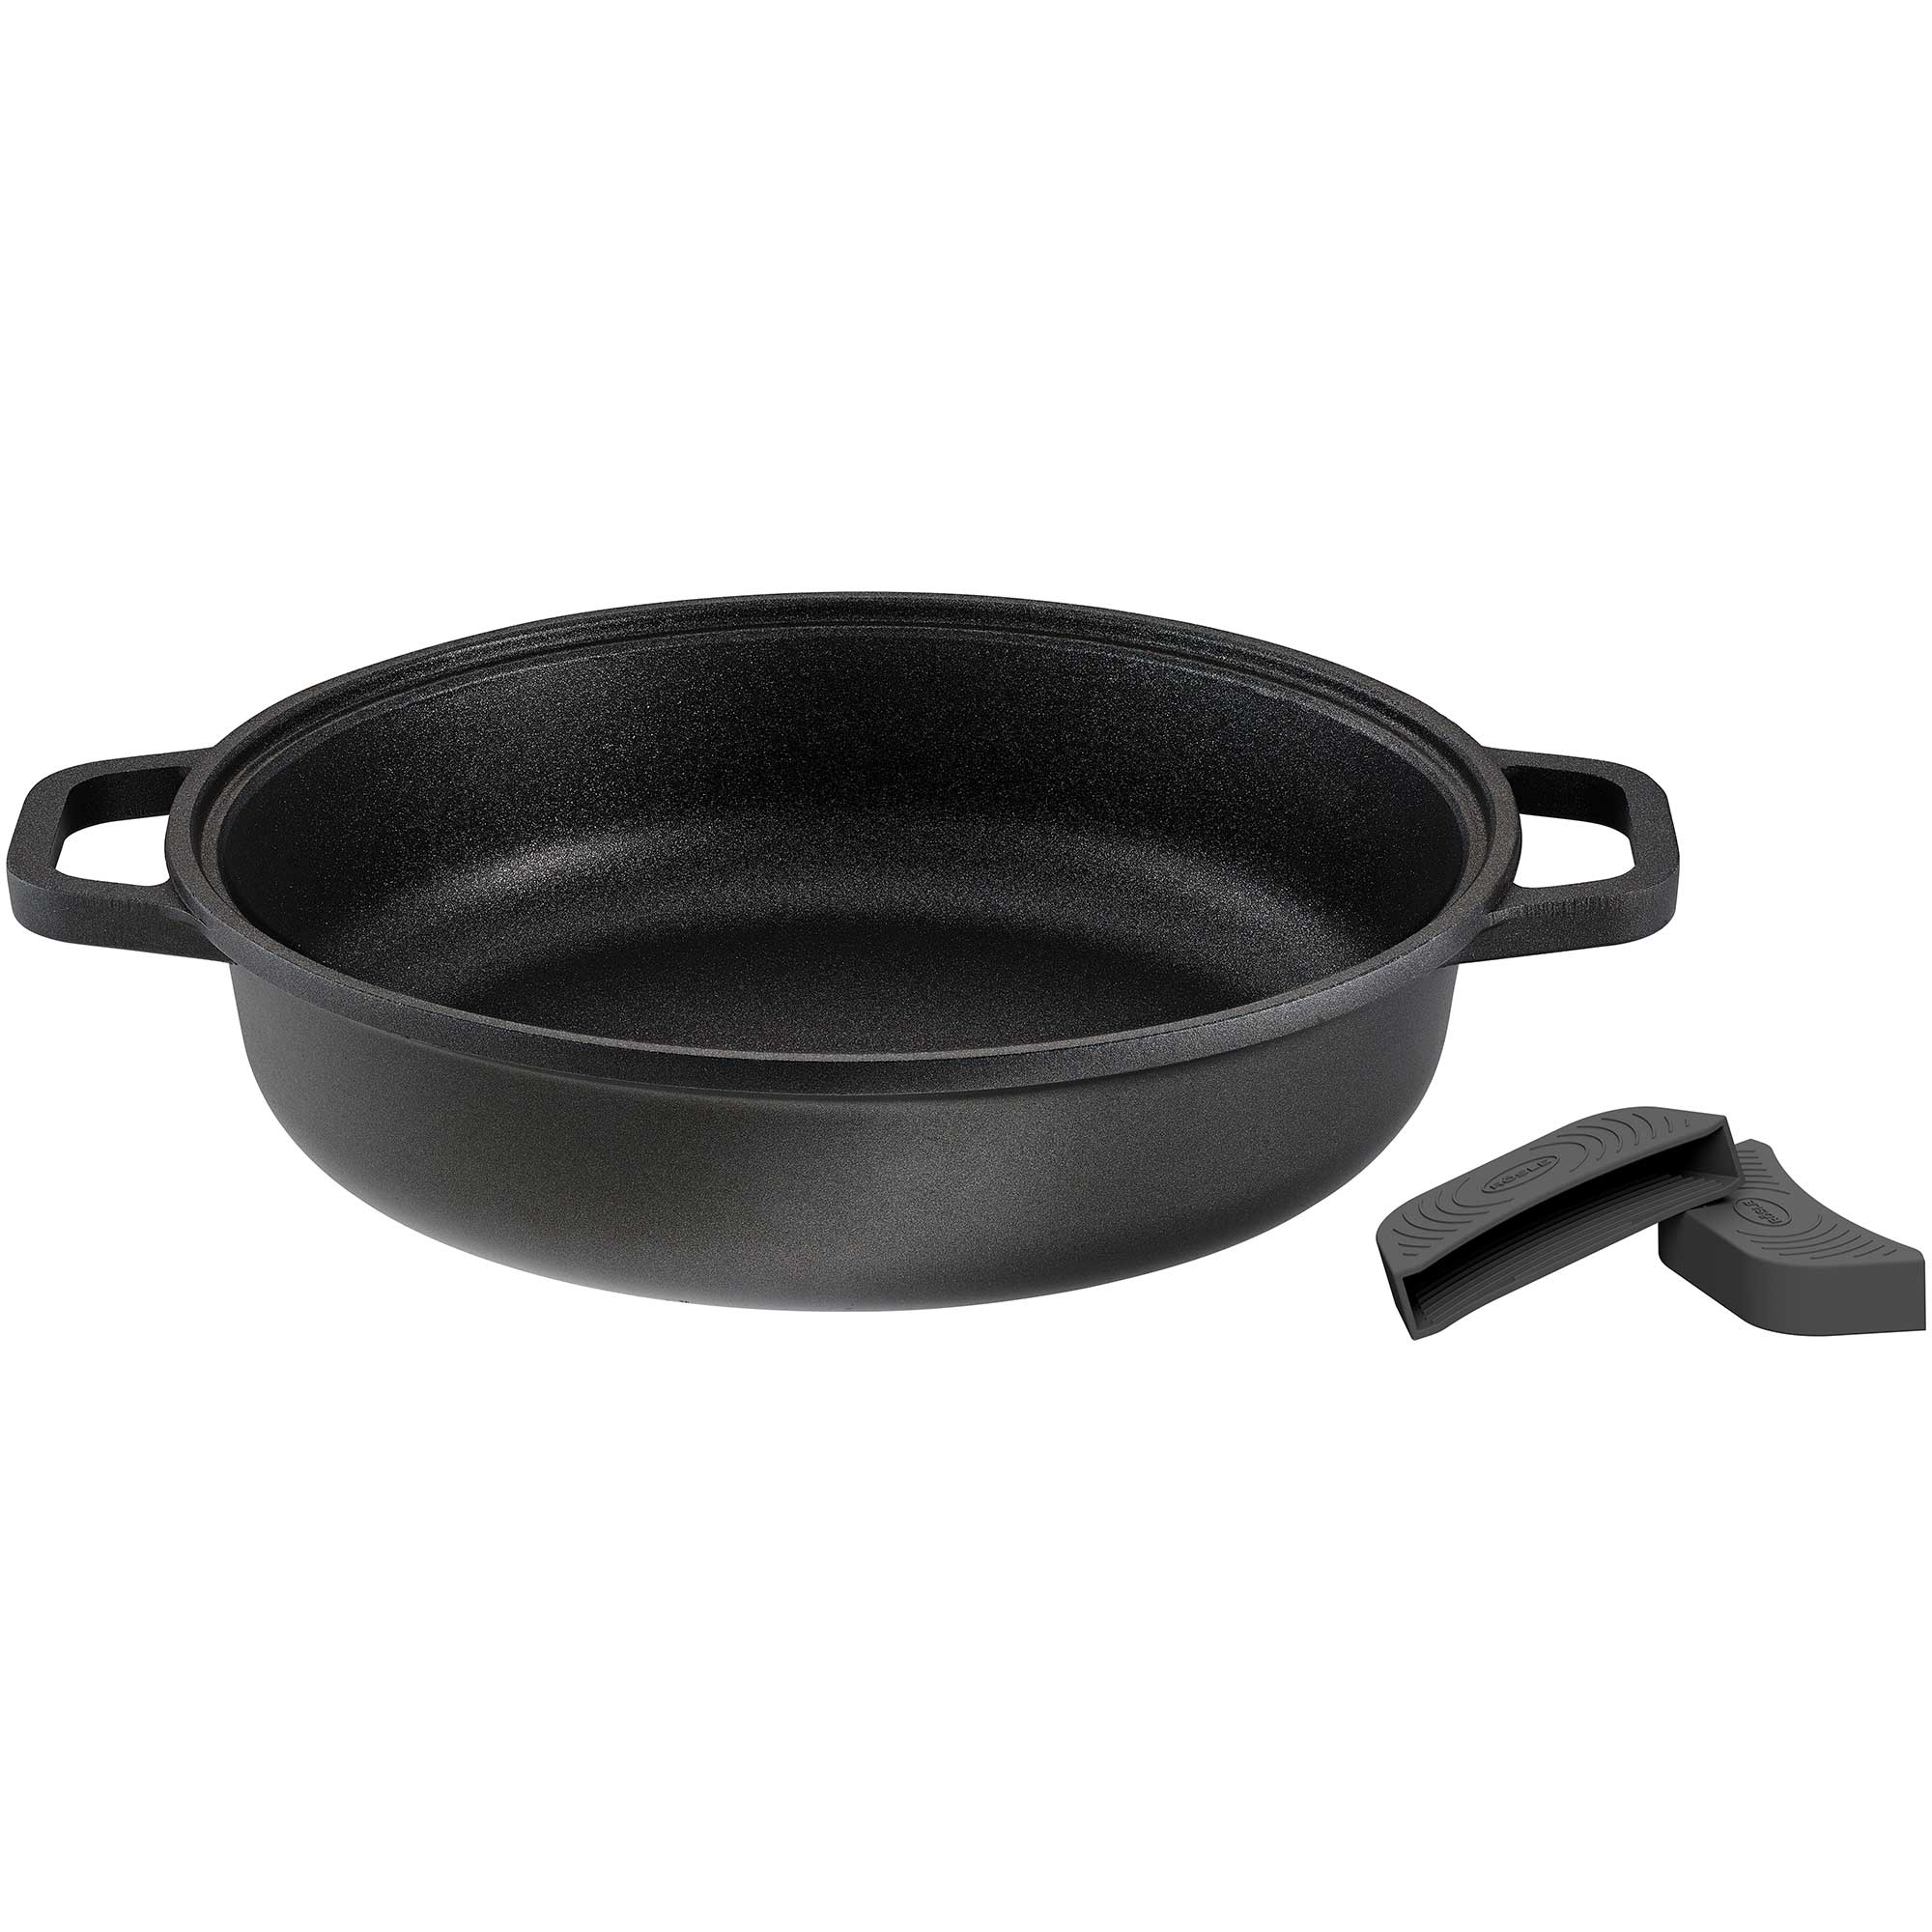 Serving Pan "Cadini" Ø 28 cm | 11.0 in. with non-stick coating ProResist